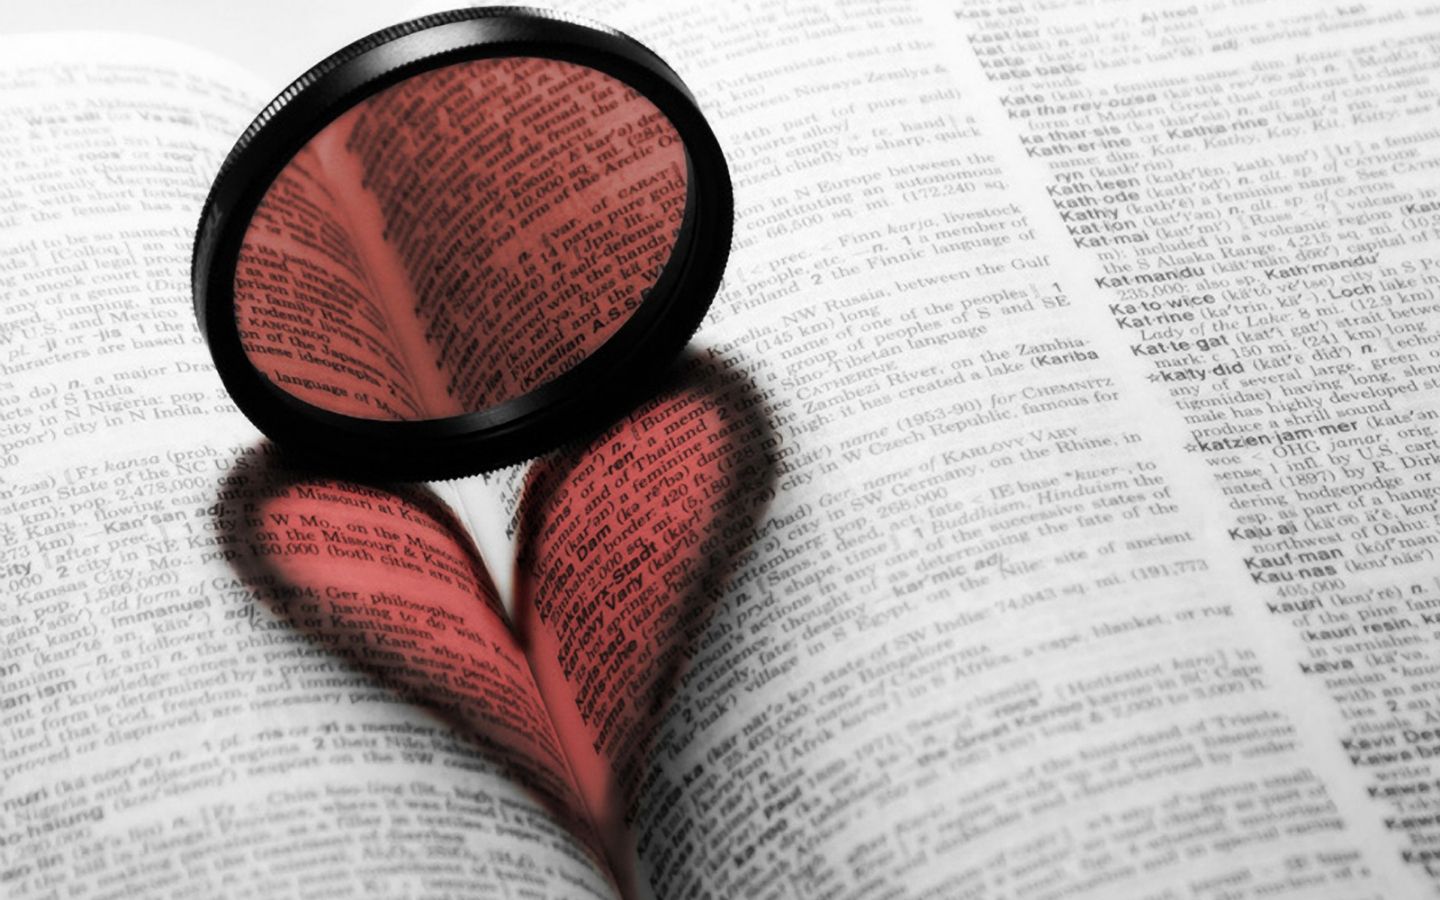 Books hearts lens wallpaper - (#178072) - High Quality and ...